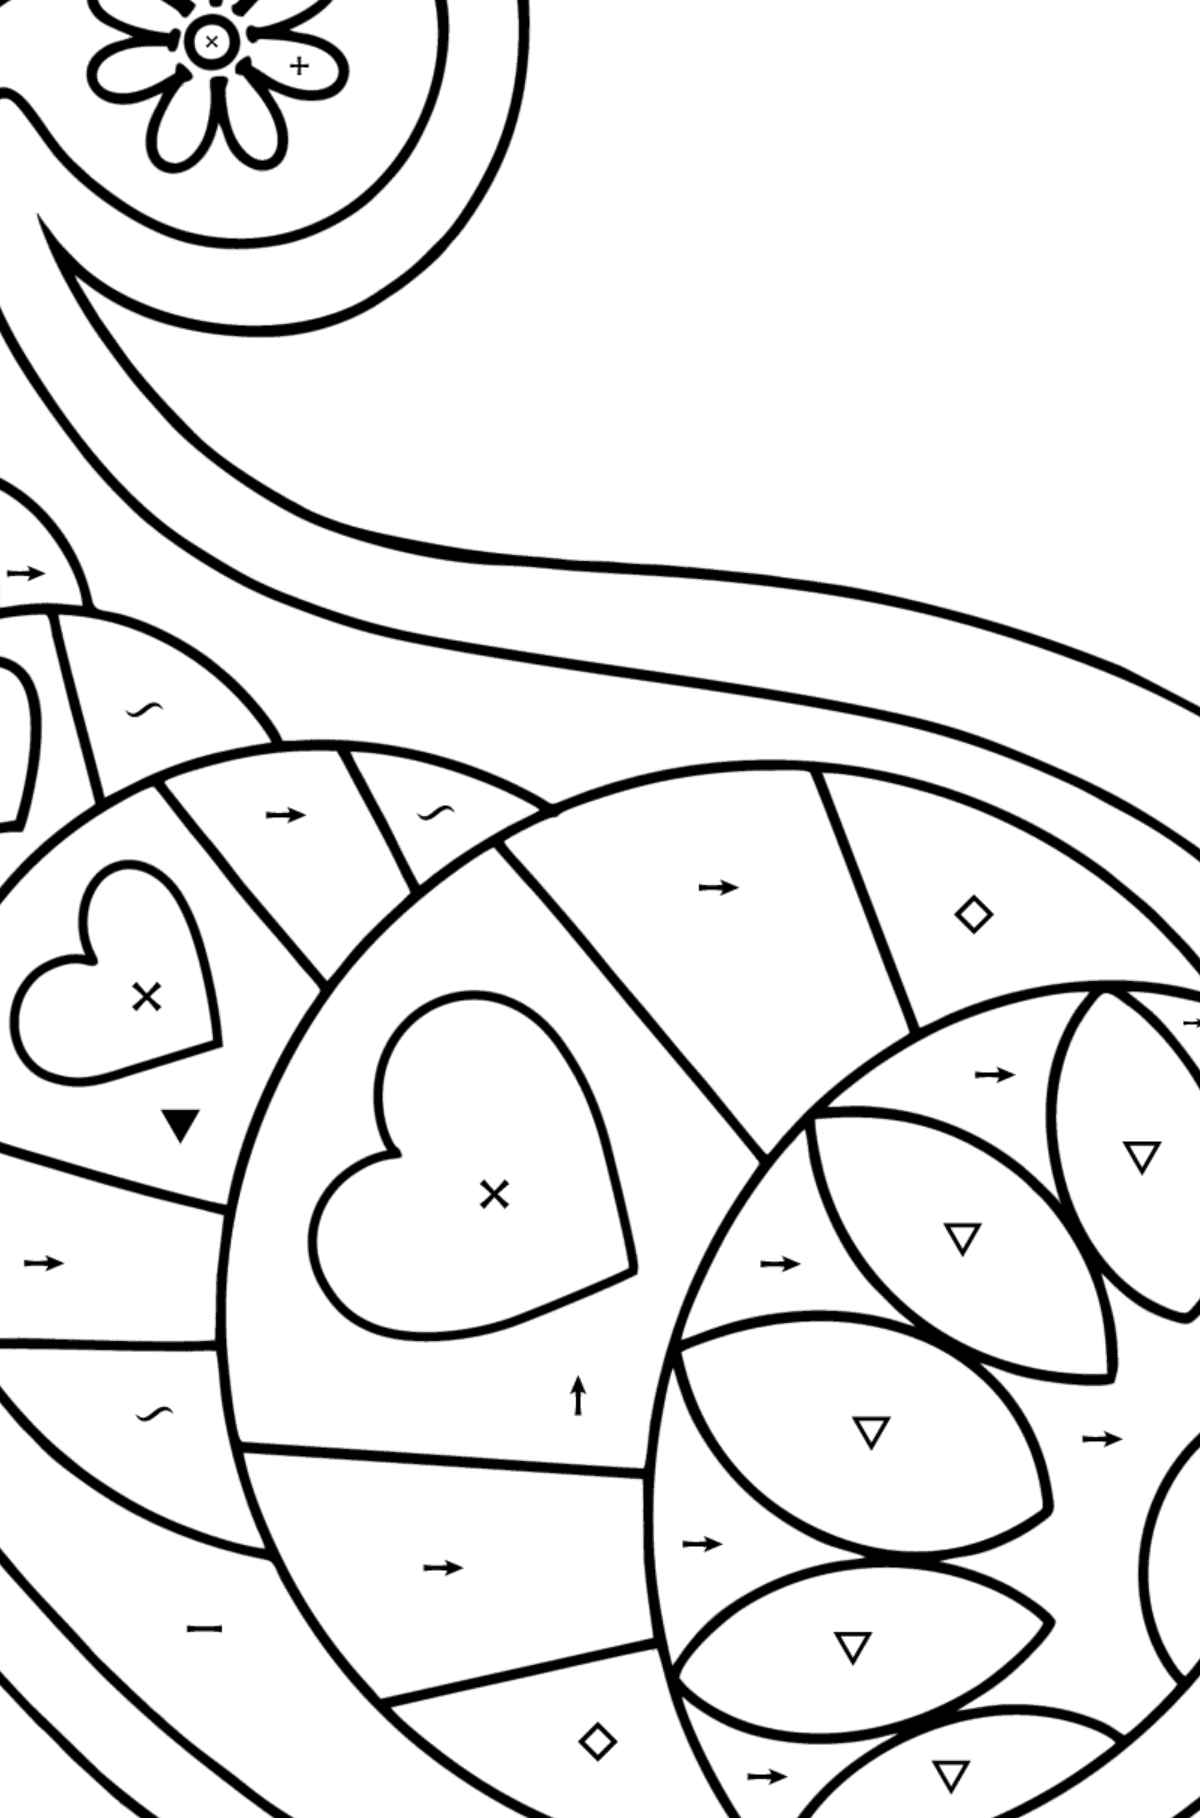 Paisley design coloring page - Coloring by Symbols for Kids